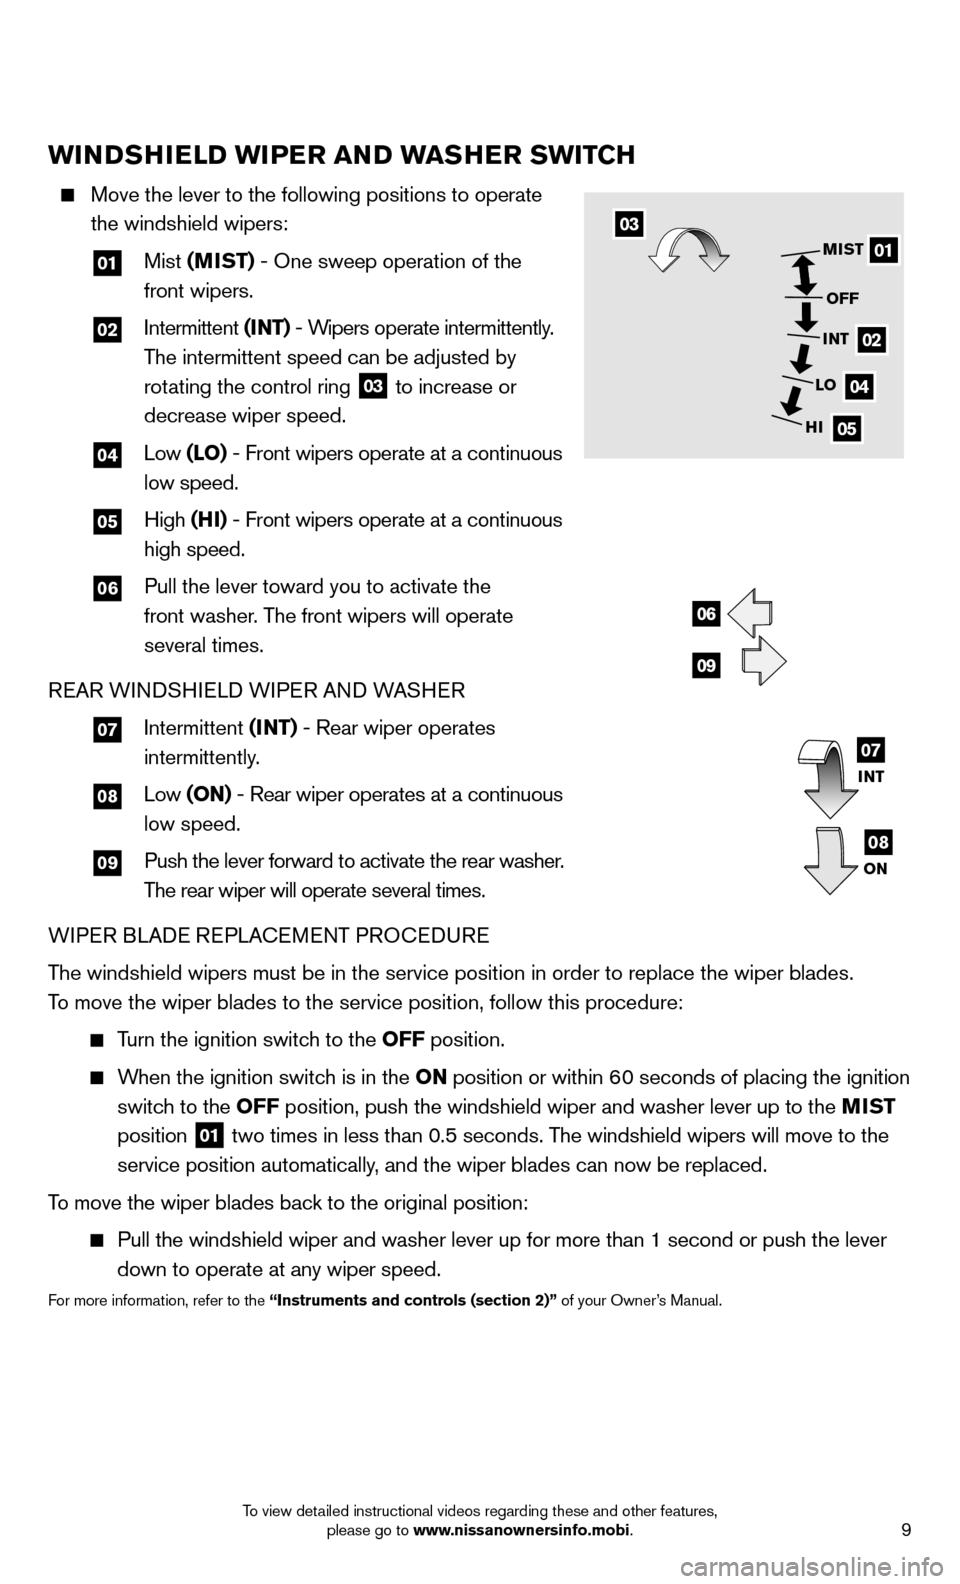 NISSAN JUKE 2014 F15 / 1.G Quick Reference Guide 9To view detailed instructional videos regarding these and other features, please go to www.nissanownersinfo.mobi.
WINDSHIELD WIPER AND WASHER  SWITCH
  Move the lever to the following positions to op